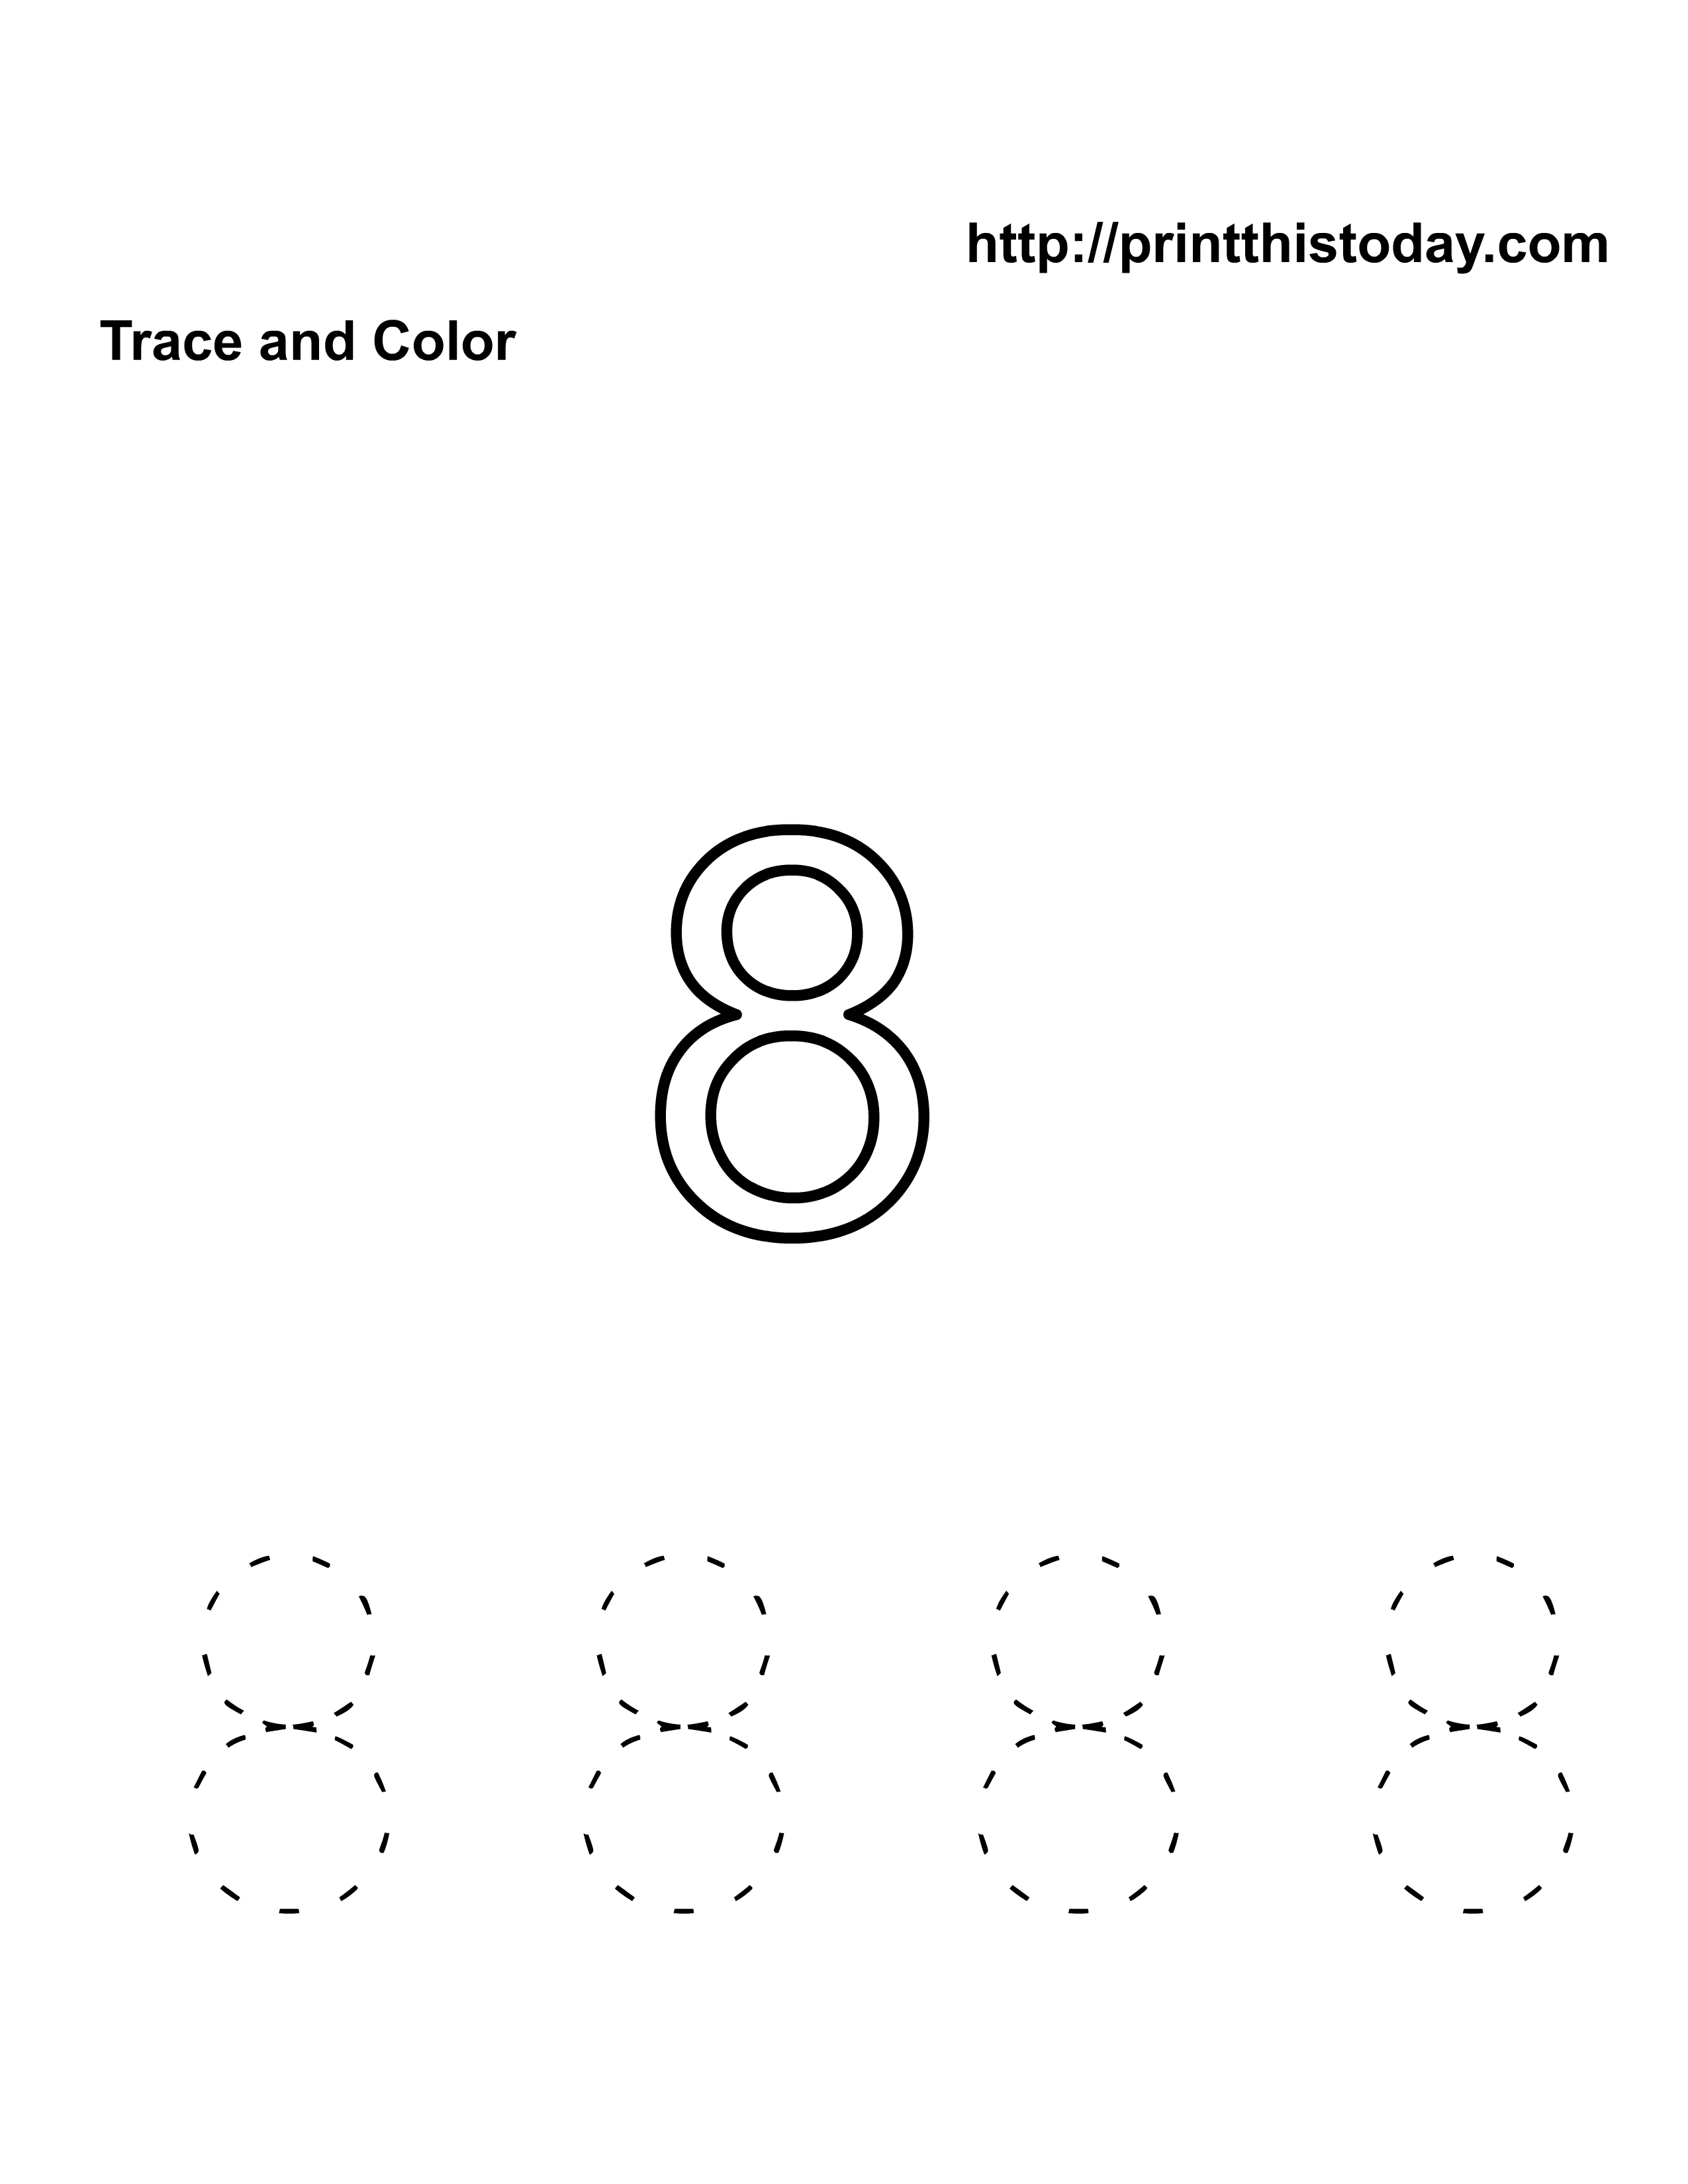 Free Printable Worksheets For The Number 8